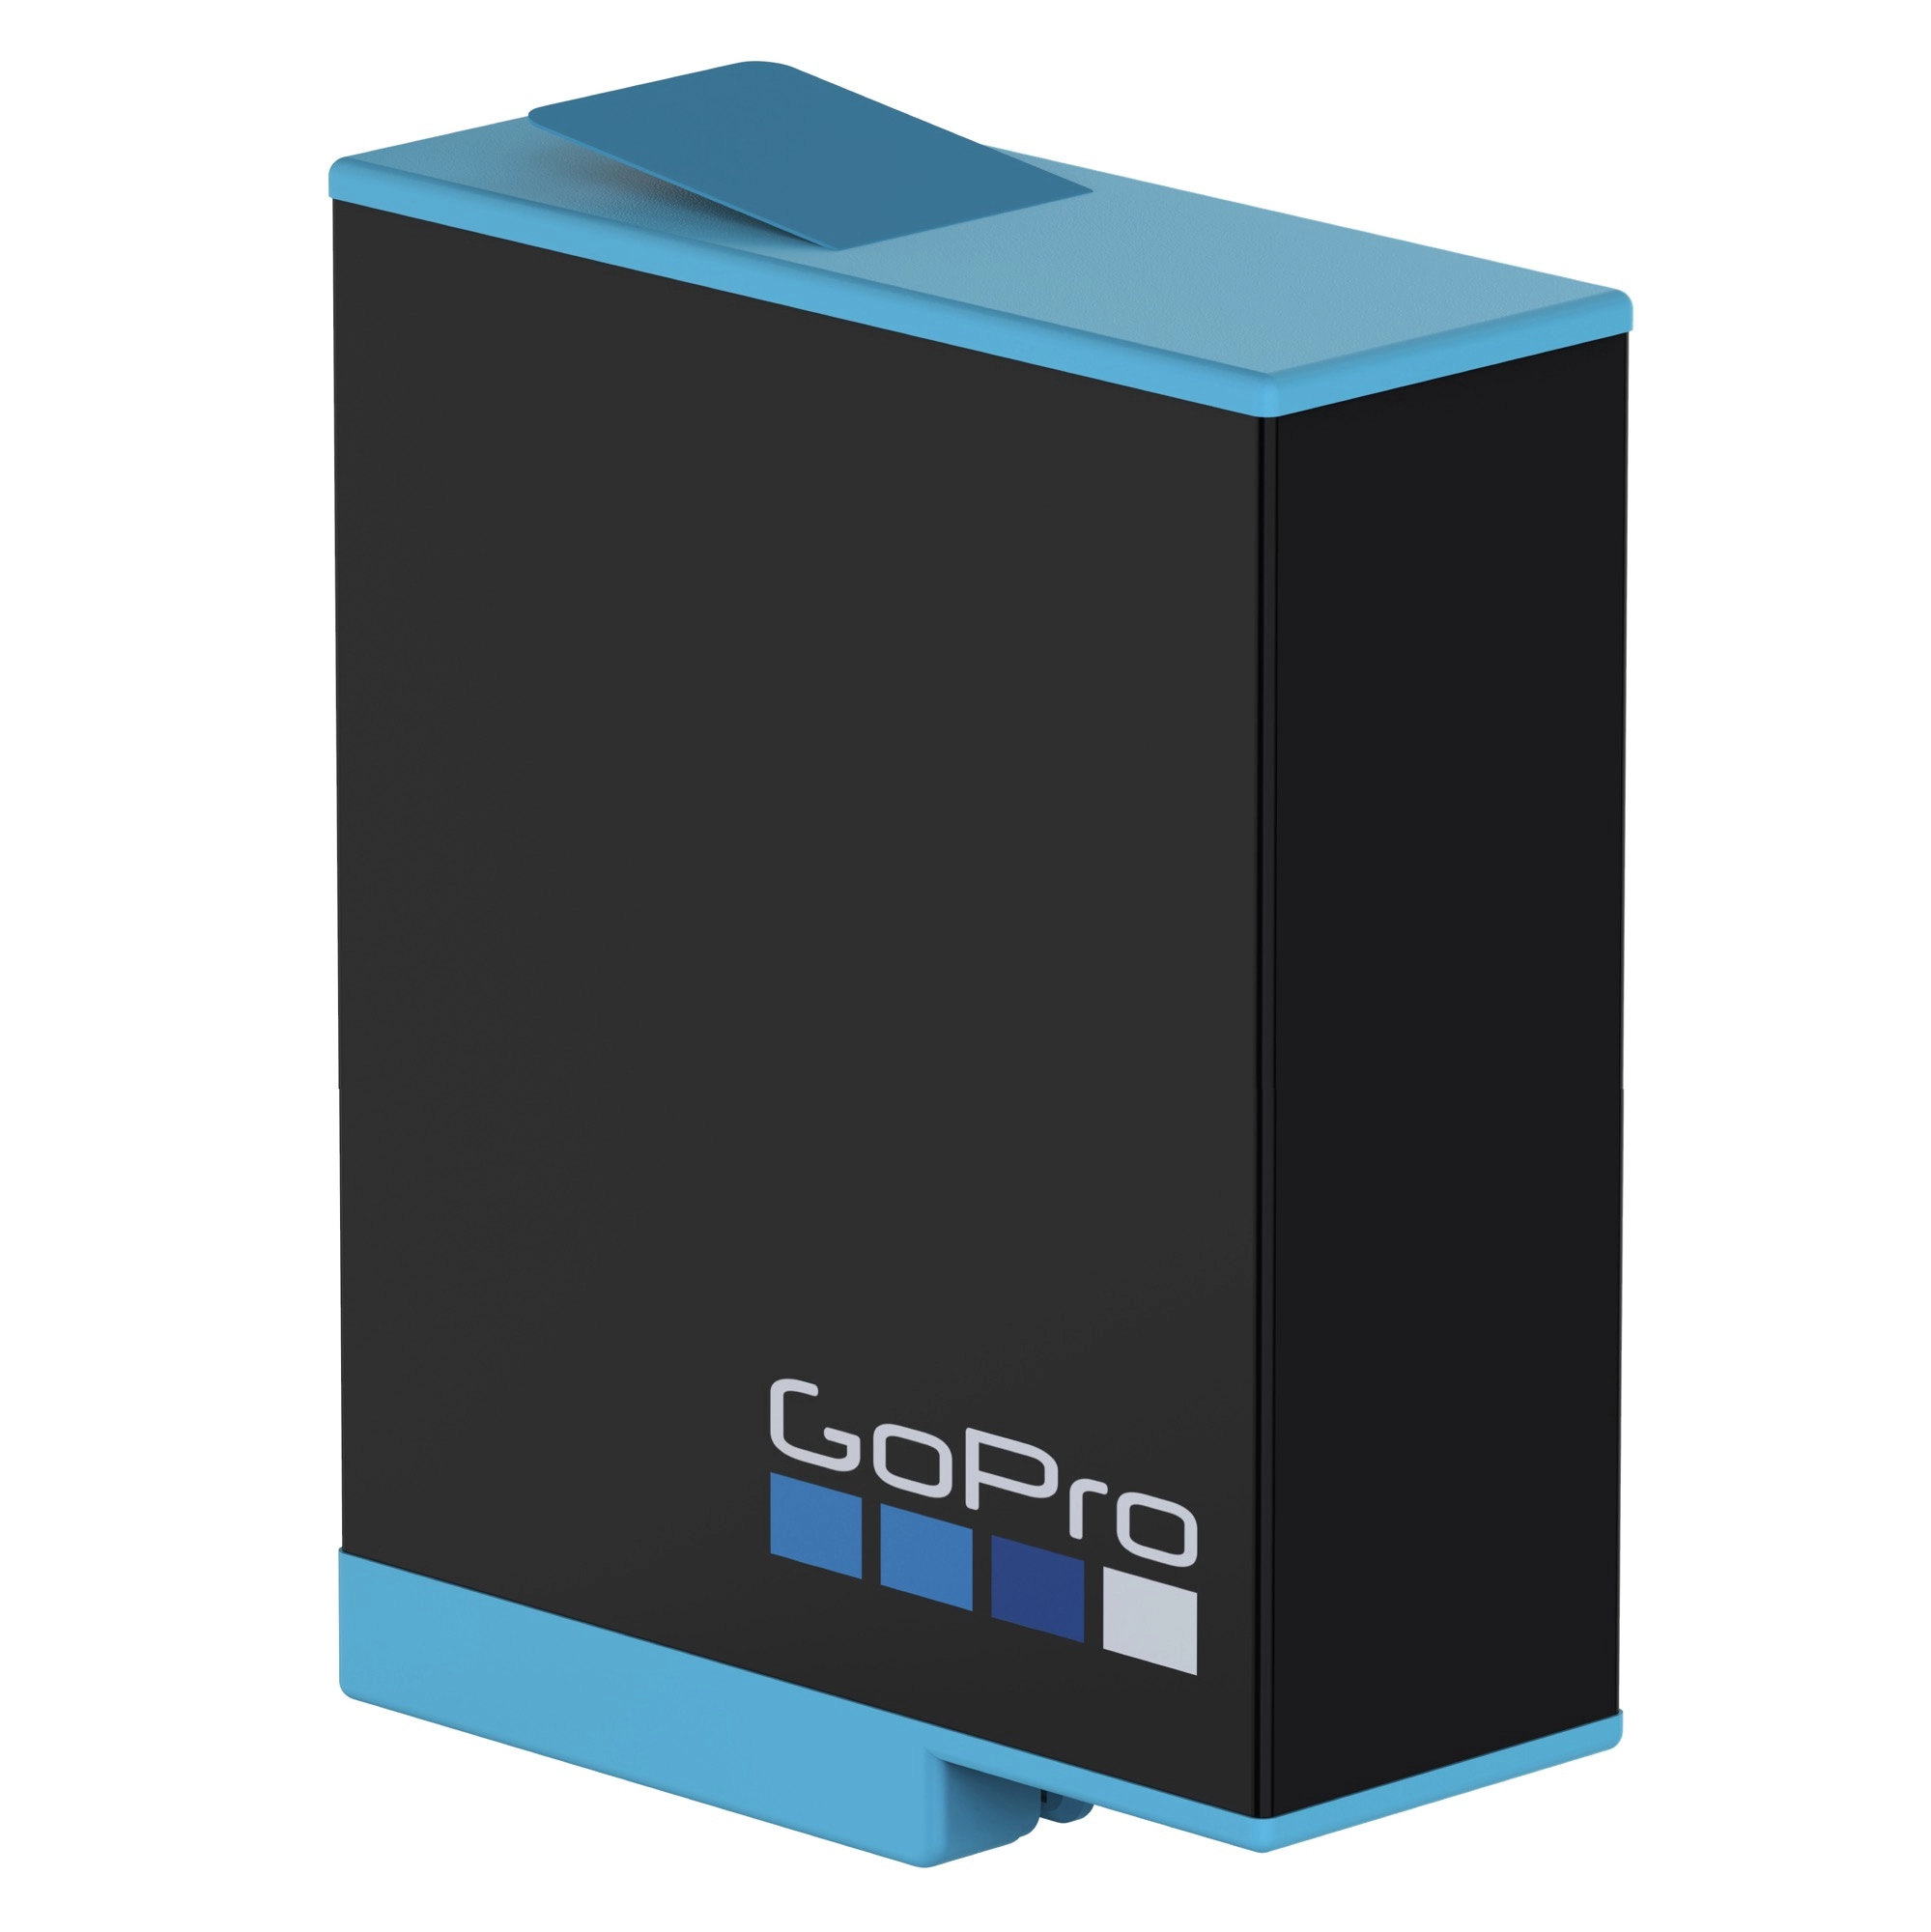 GoPro Rechargeable Battery (HERO8 Black) - lithium-ion rechargeable battery, 1220mAh, compatible with HERO8 Black, HERO7 Black, HERO6 Black, HERO5 Black, HERO (2018)